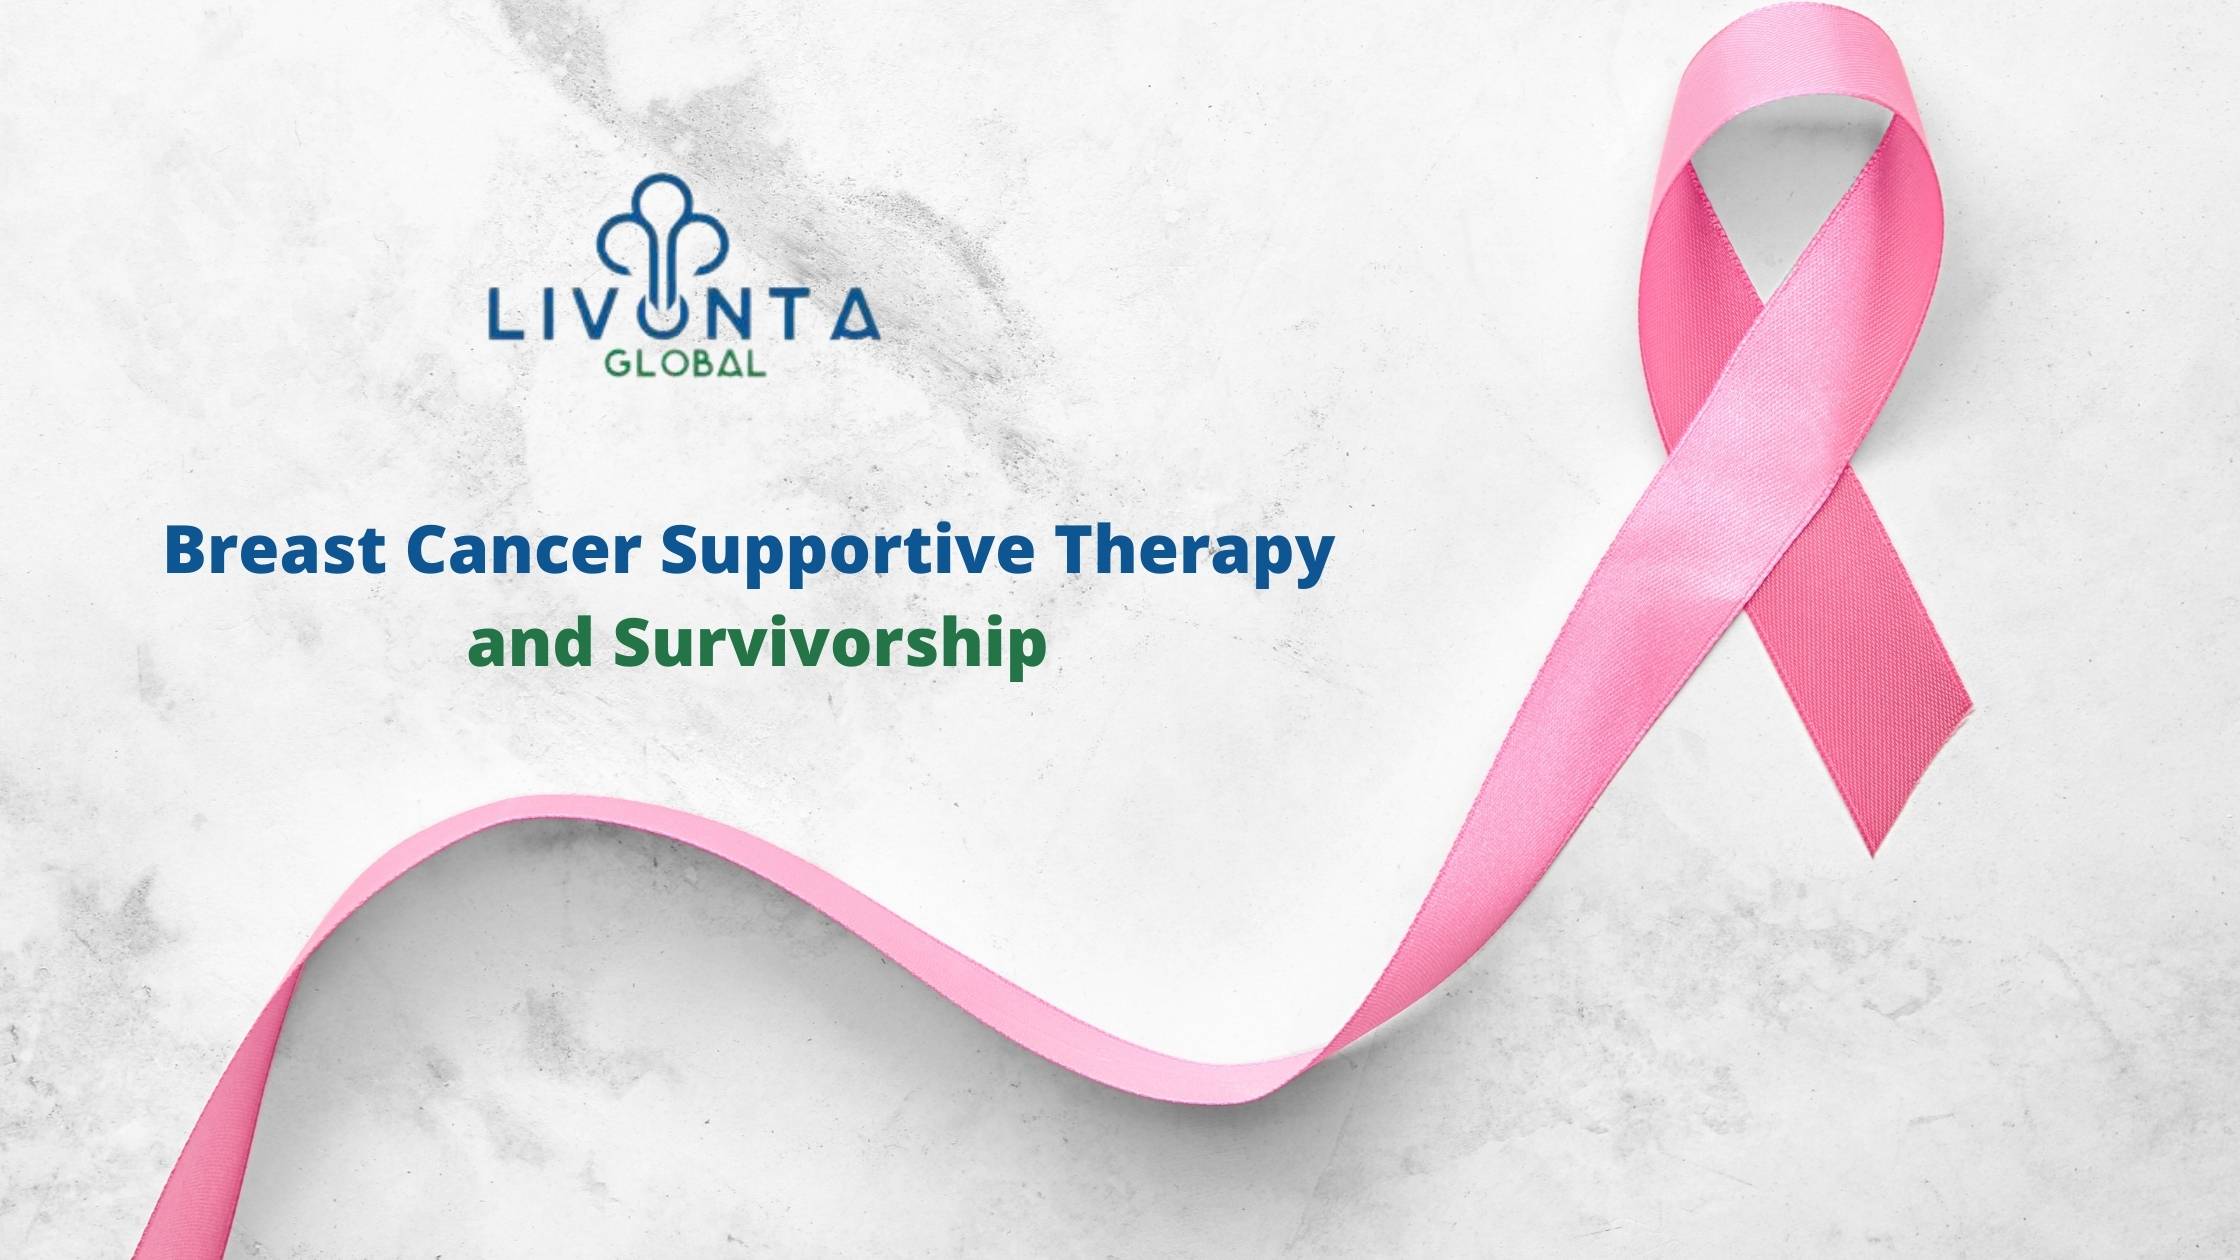 Breast Cancer Supportive Therapy and Survivorship